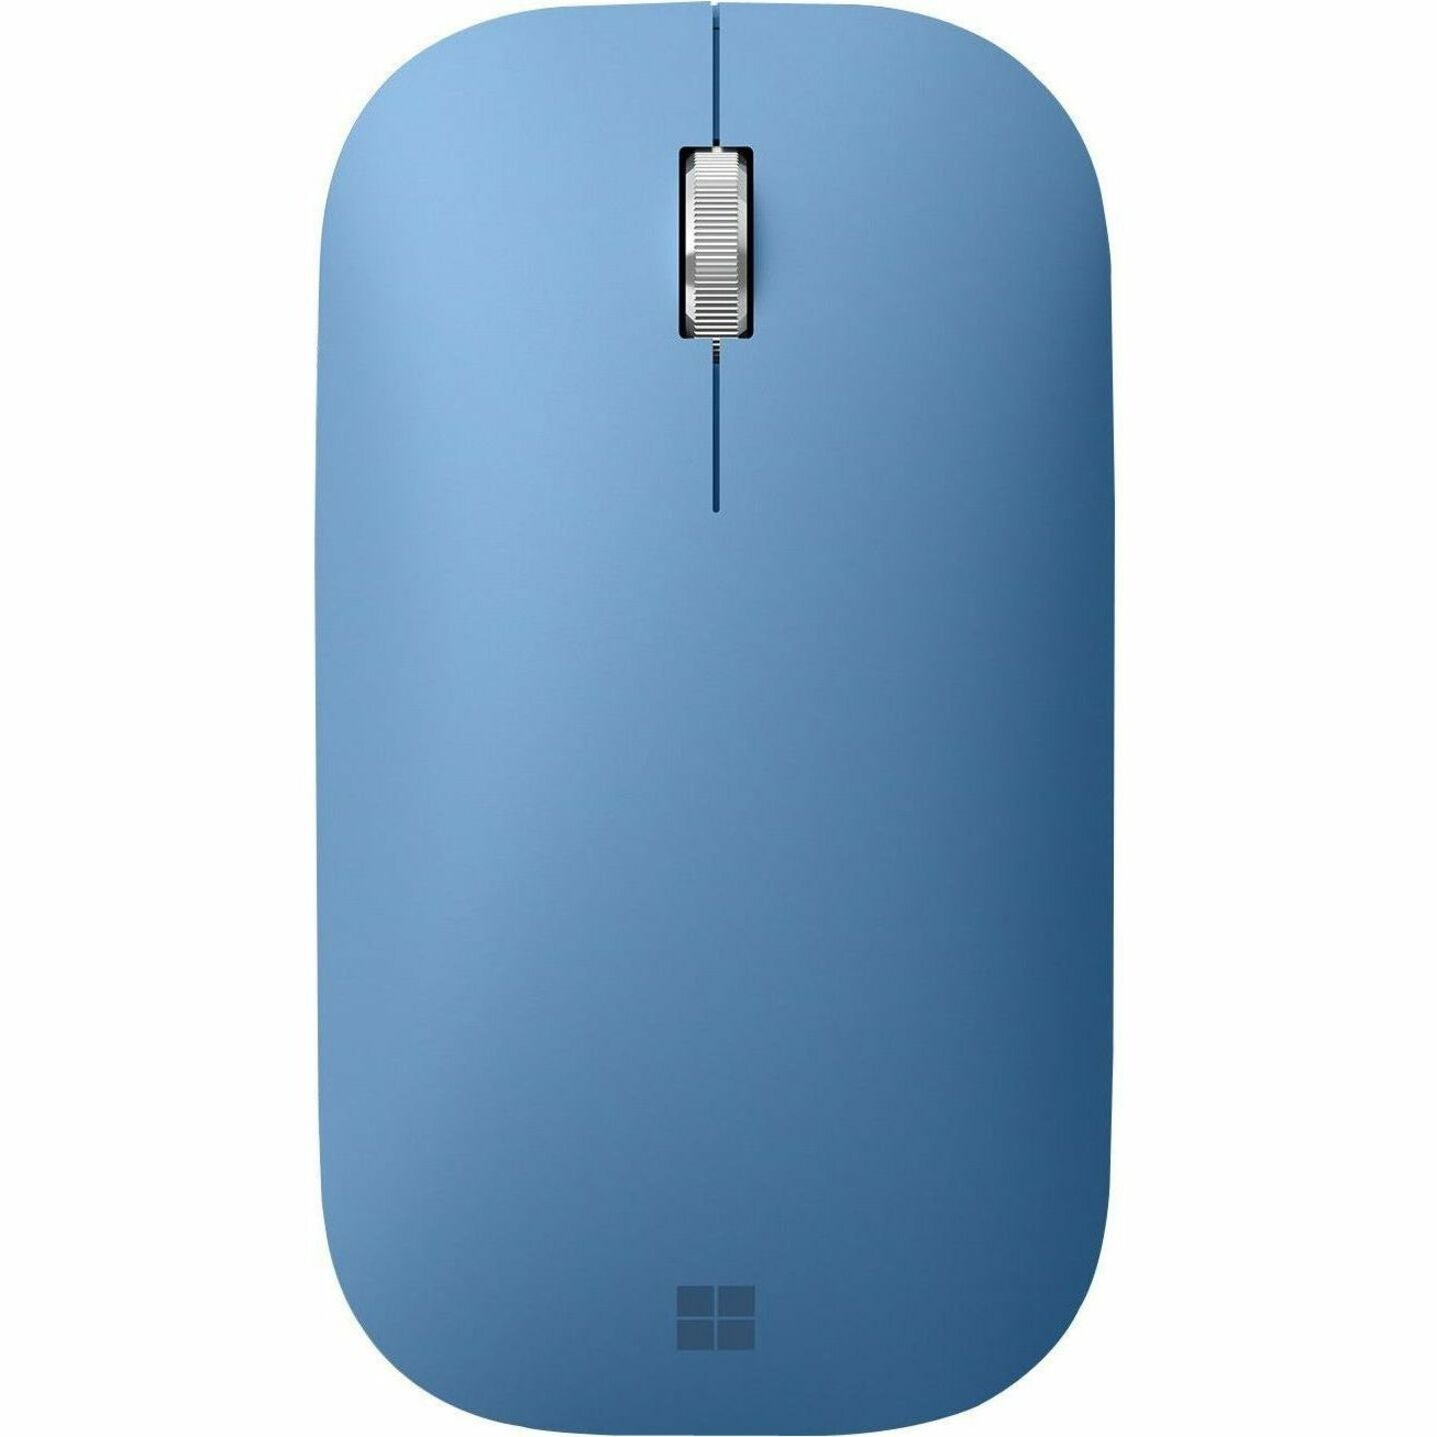 Microsoft KTF-00069 Modern Mobile Mouse Bluetooth Sapphire, Wireless Optical Mouse